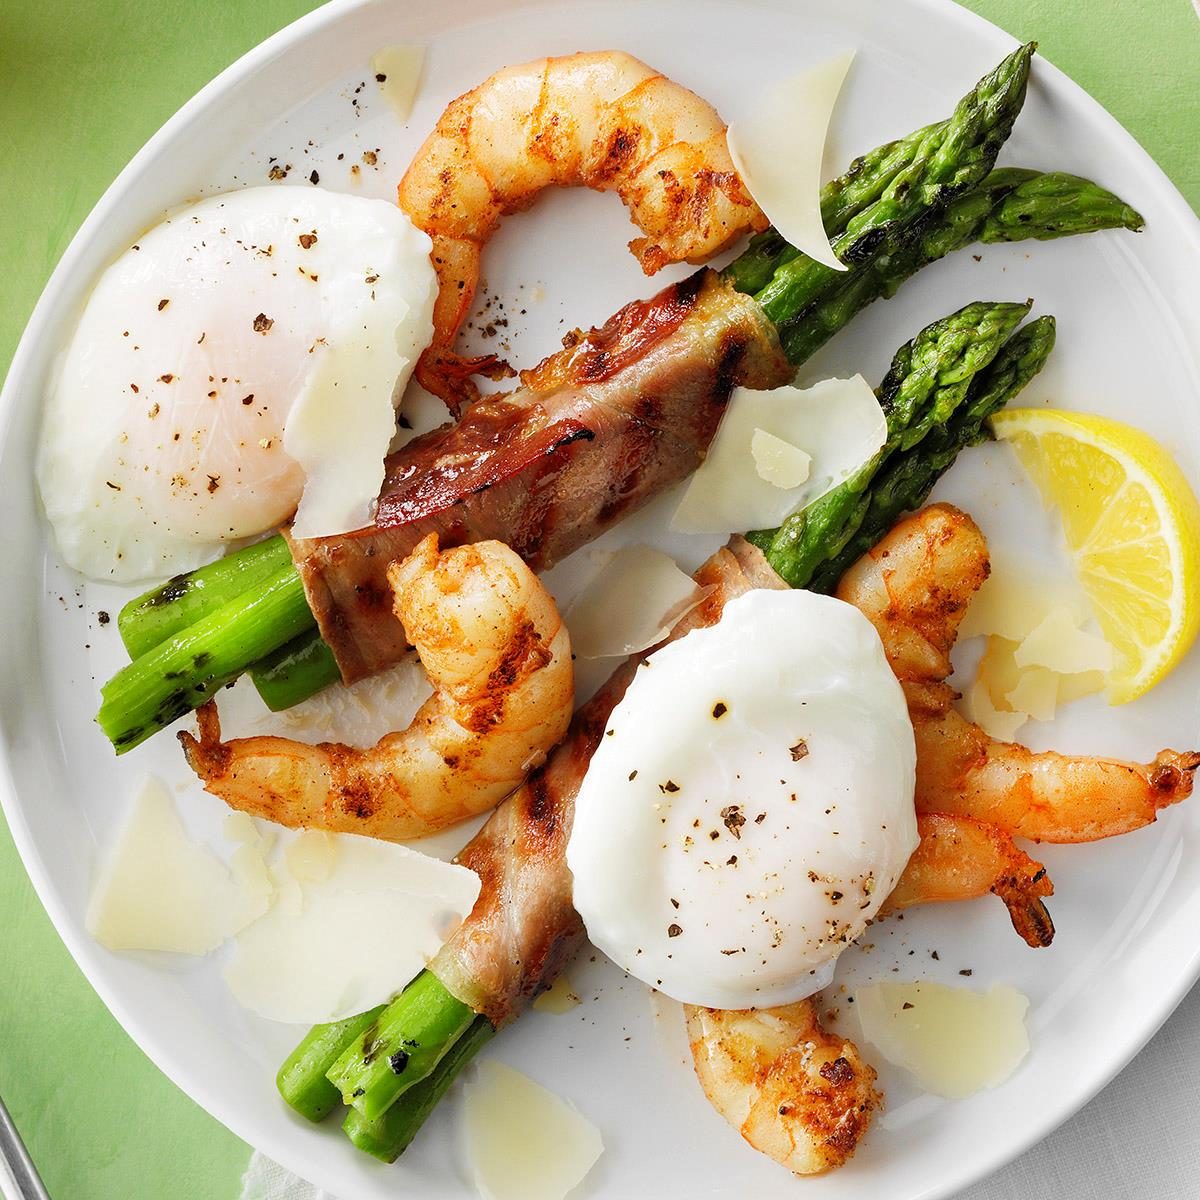 Egg-Topped Grilled Asparagus with Cajun Shrimp